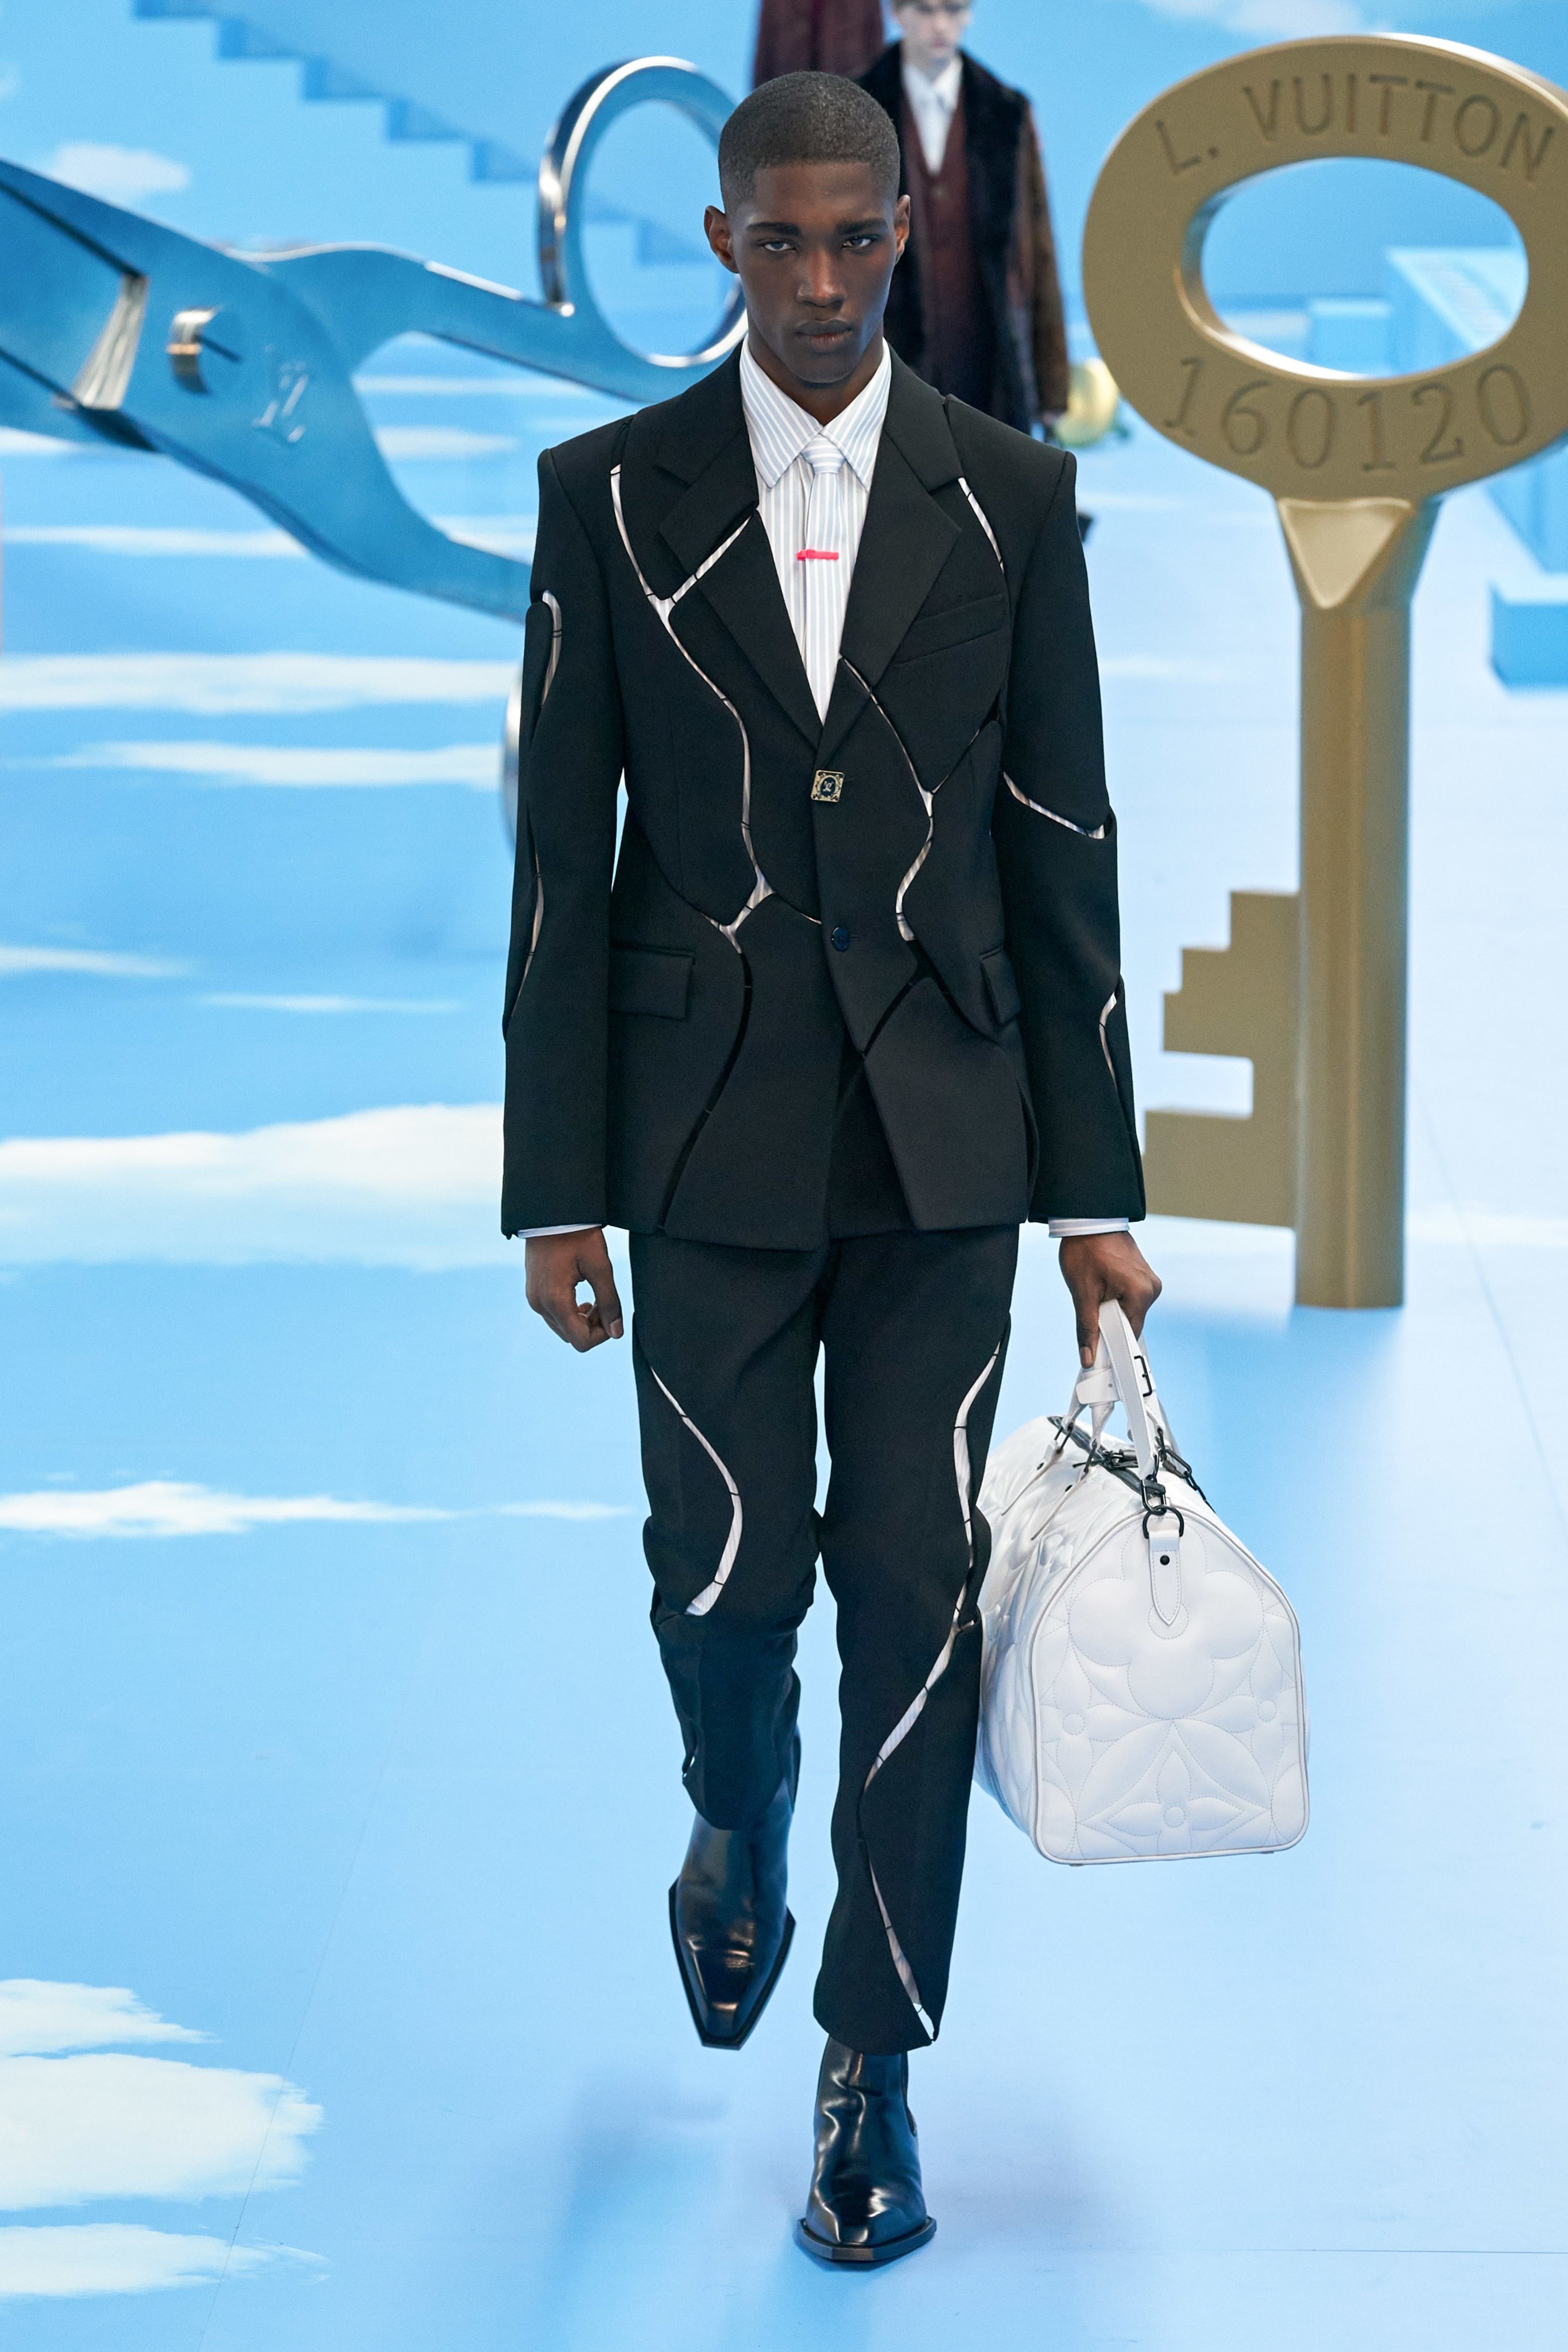 The reference to “The Truman Show” in Louis Vuitton's show